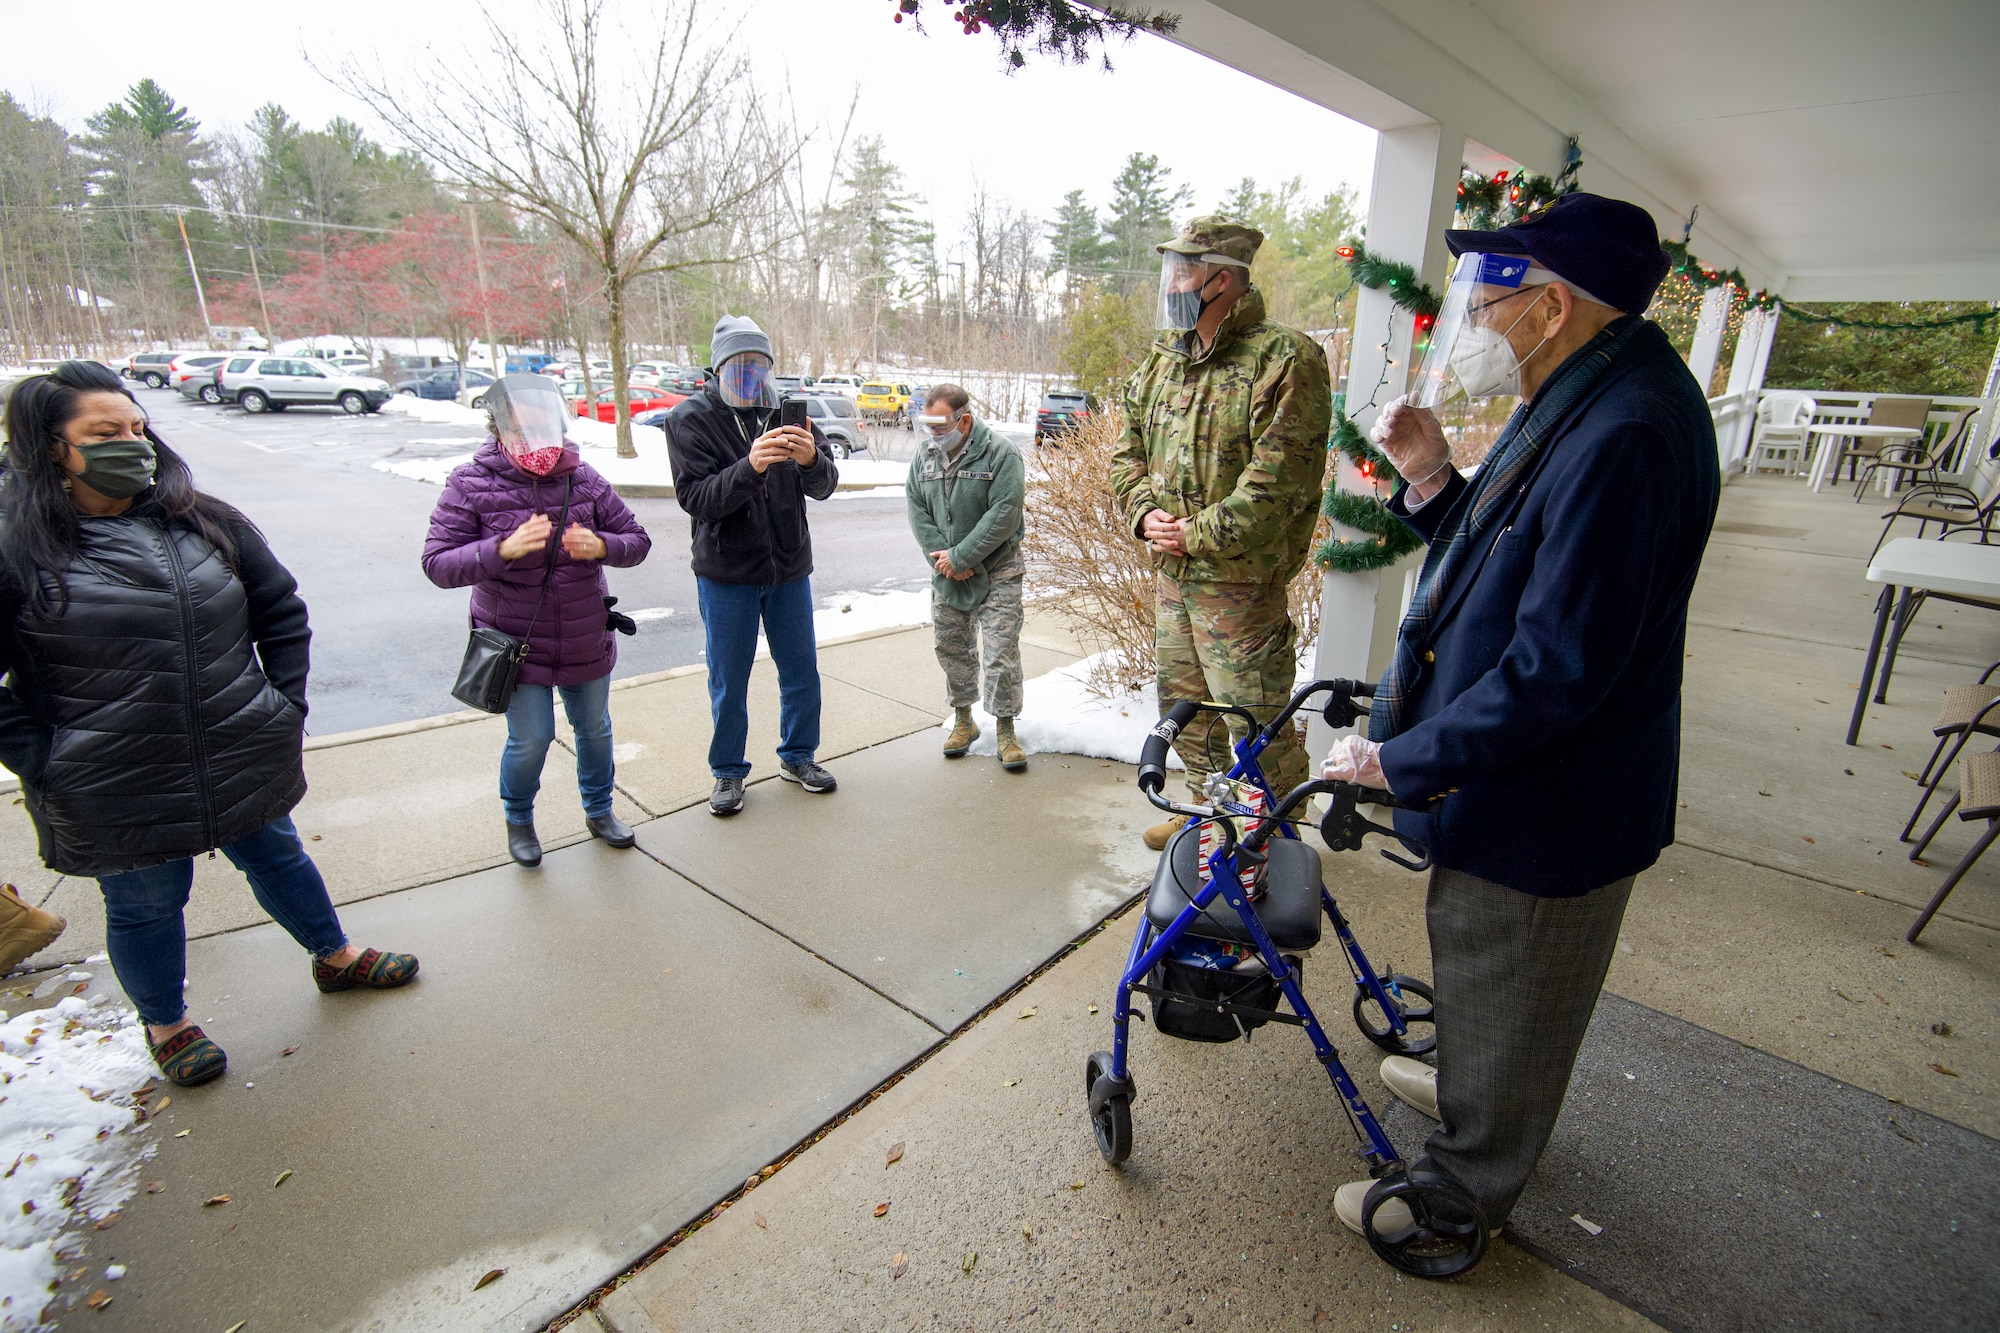 World War II veteran Lenny Roberge, Vermont’s oldest living veteran, says a few words of thanks to the Airmen of the Vermont Air National Guard at a small ceremony outside his nursing home in South Burlington, Vt., Dec. 22, 2020. In order to honor Roberge, Airmen from the 158th Fighter Wing had a flag flown in an F-35 during a combat training sortie over the mountains of Vermont and New York. (U.S. Air National Guard photo by Senior Master Sgt. Michael Davis)